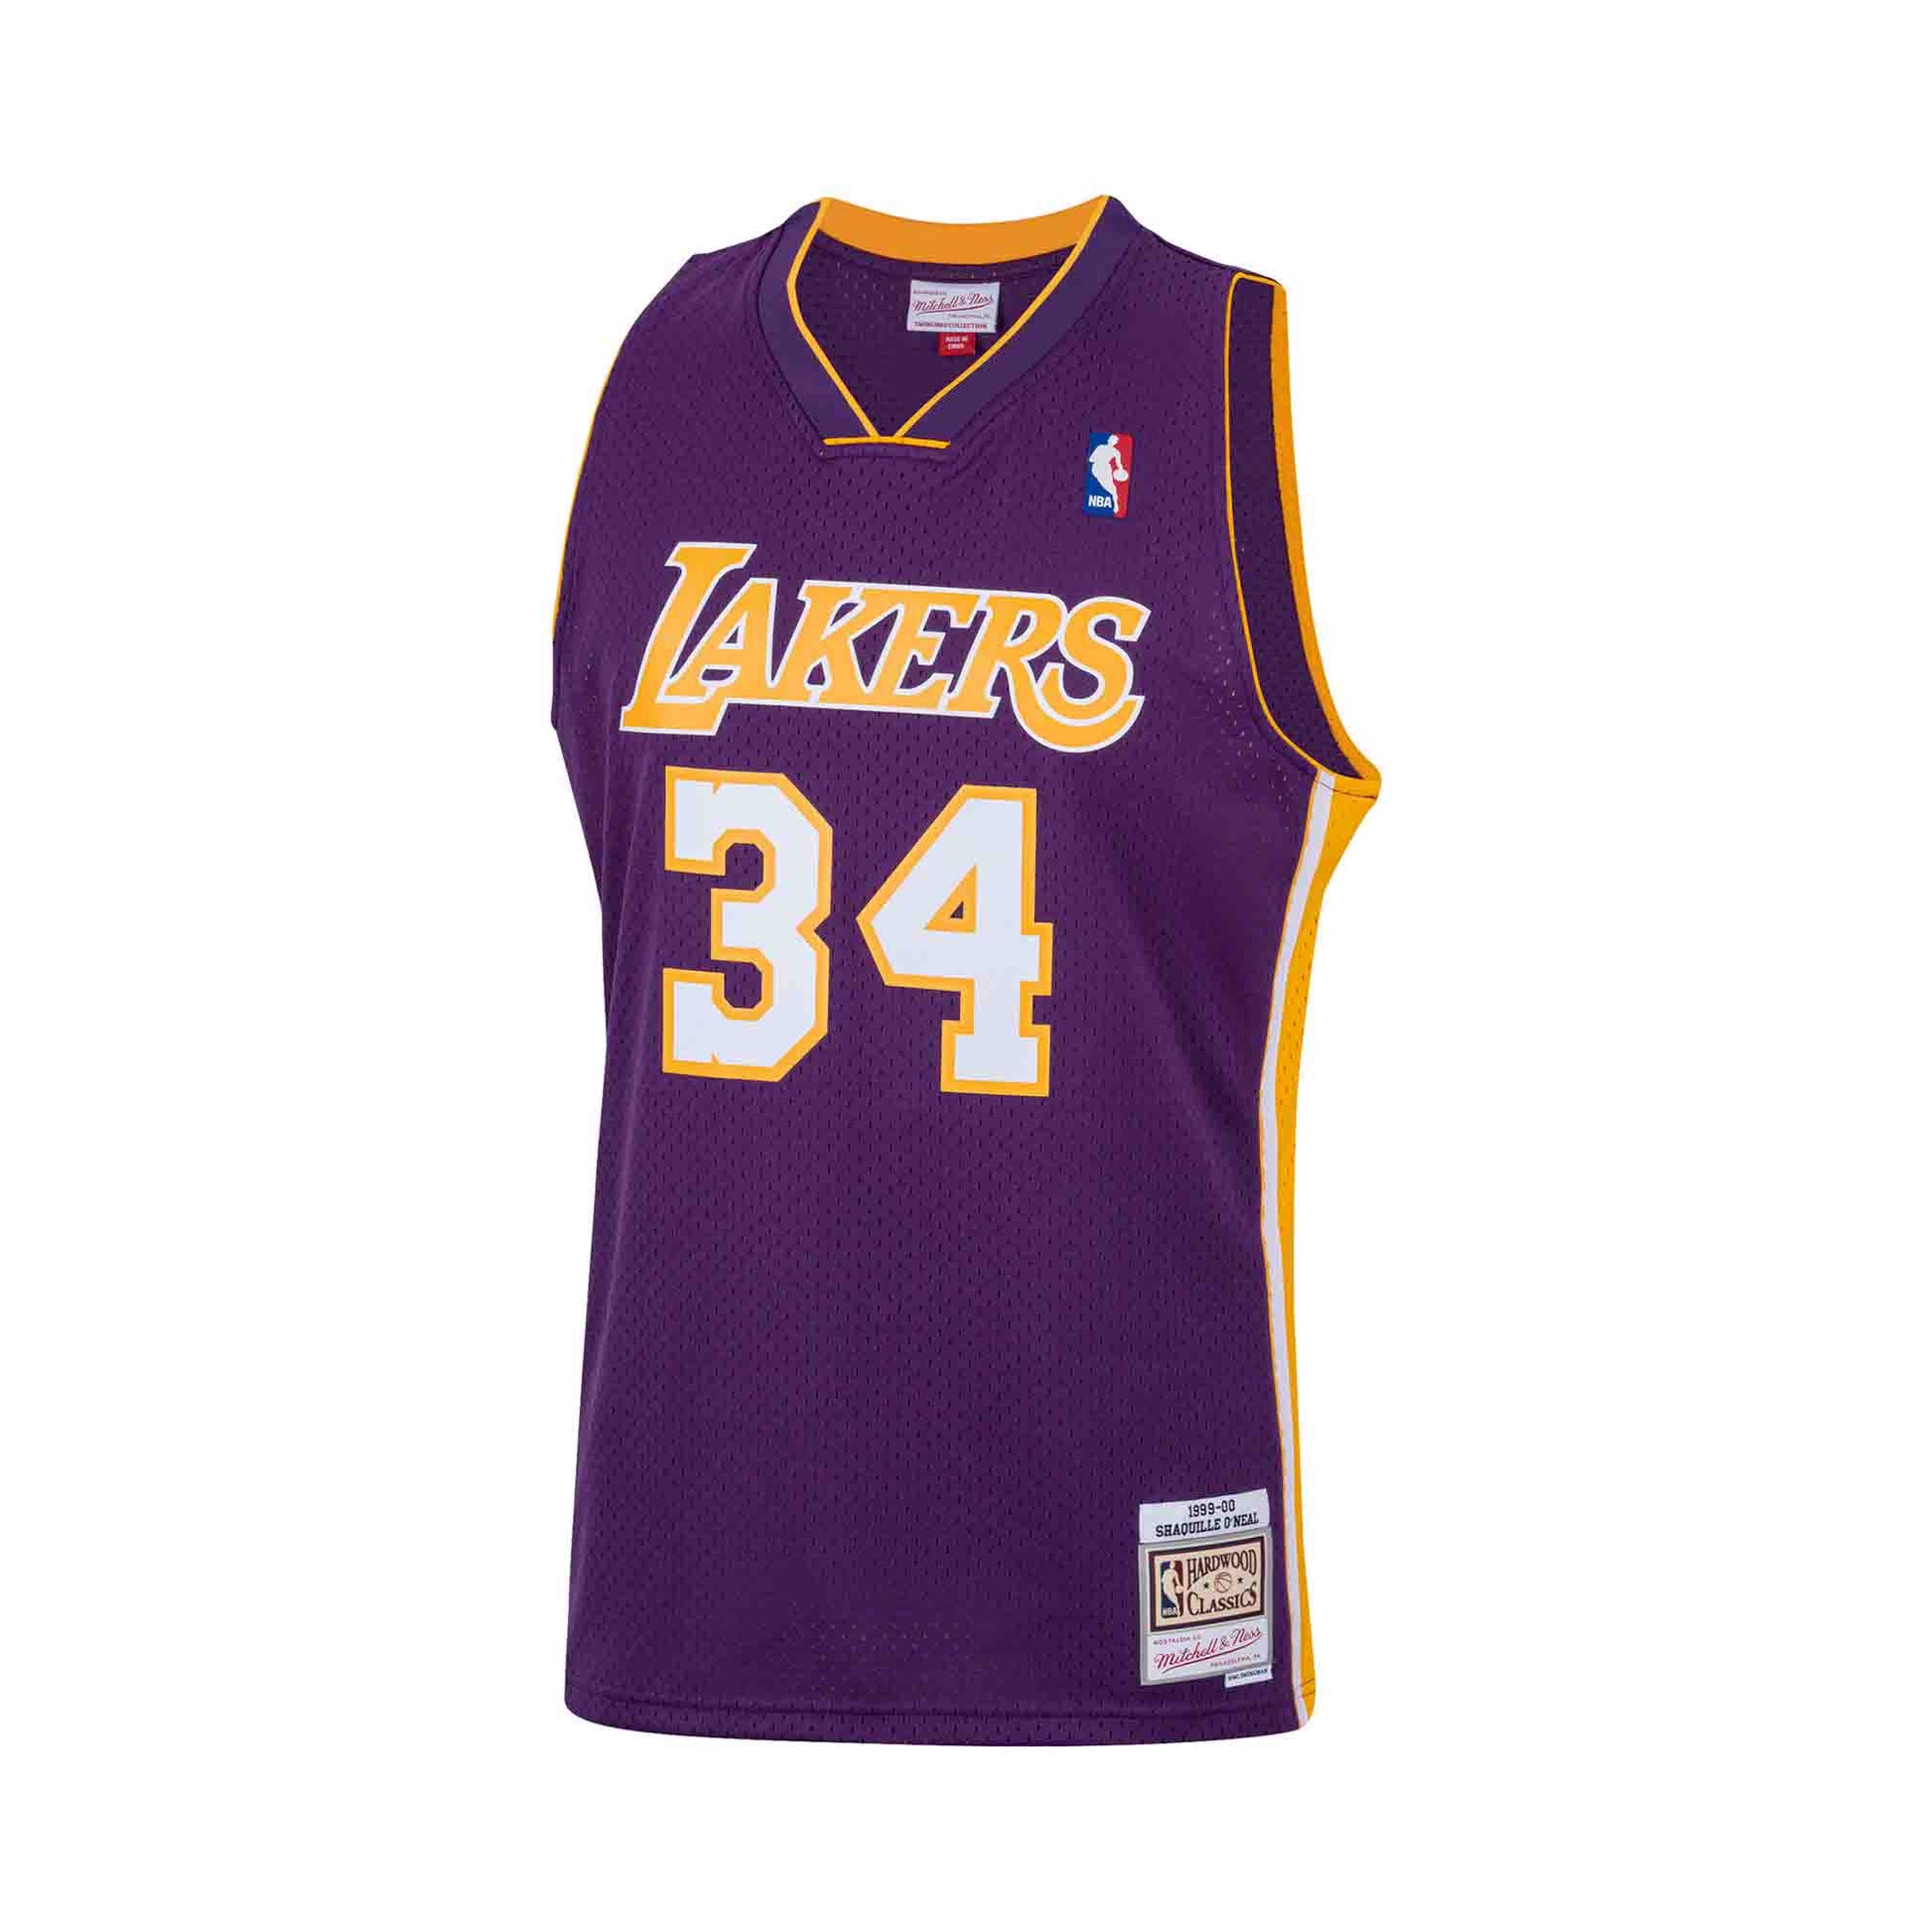 LOS ANGELES LAKERS SHAQUILLE O'NEAL JERSEY NBA BASKETBALL MITCHELL  & NESS SIZE L